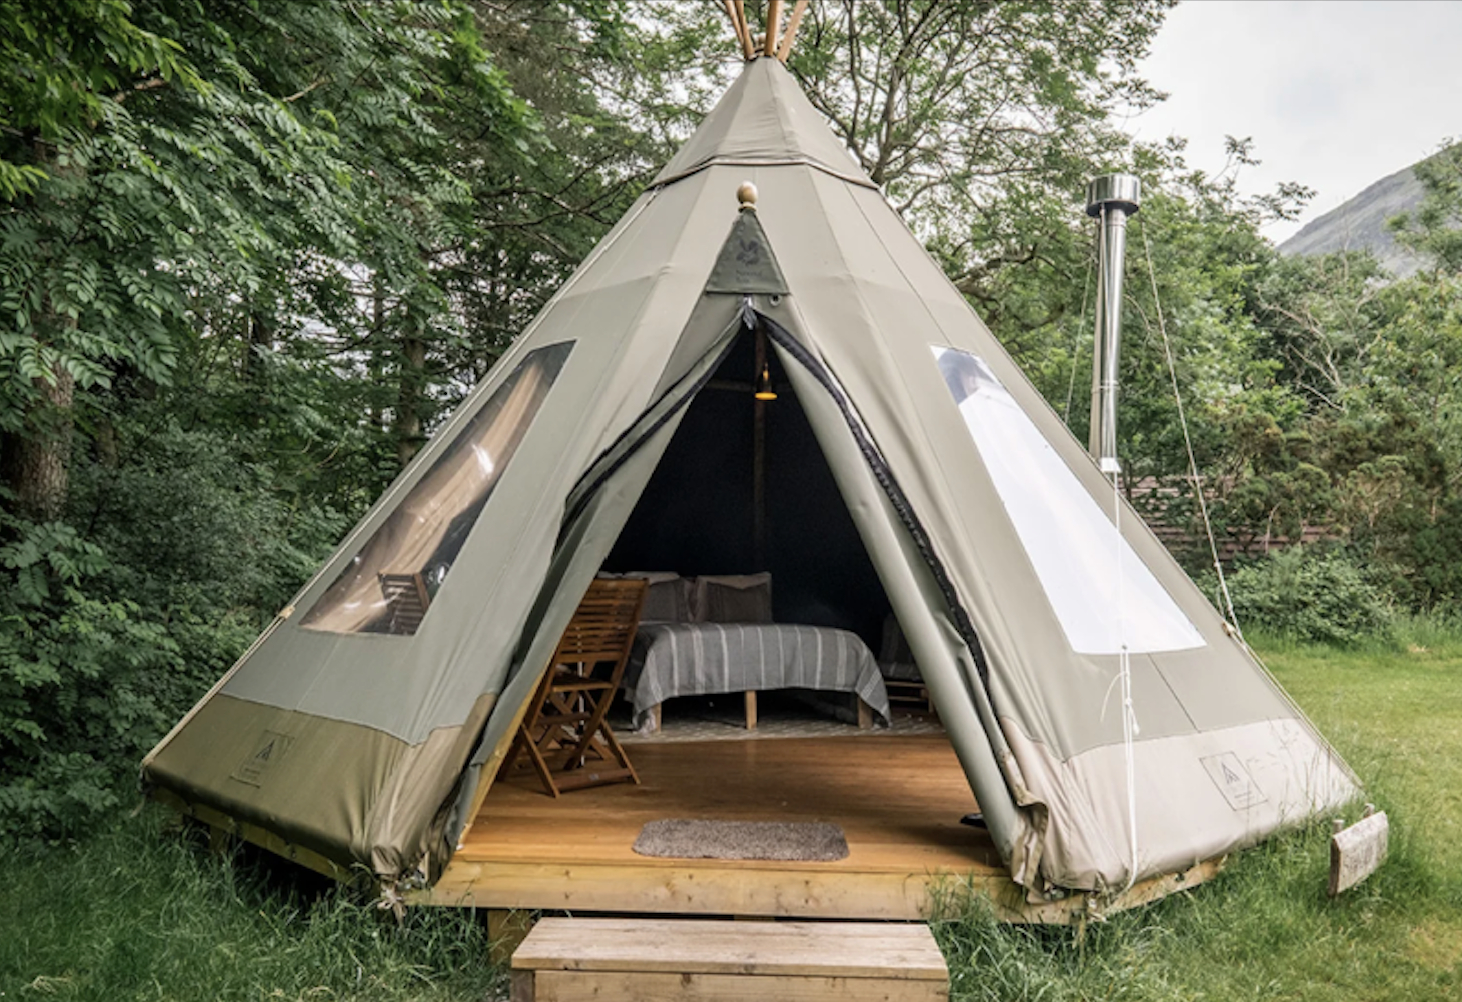 Whether you are looking for the most romantic of settings or a fun camping holiday with the family take a look at these fabulous Tipi tents